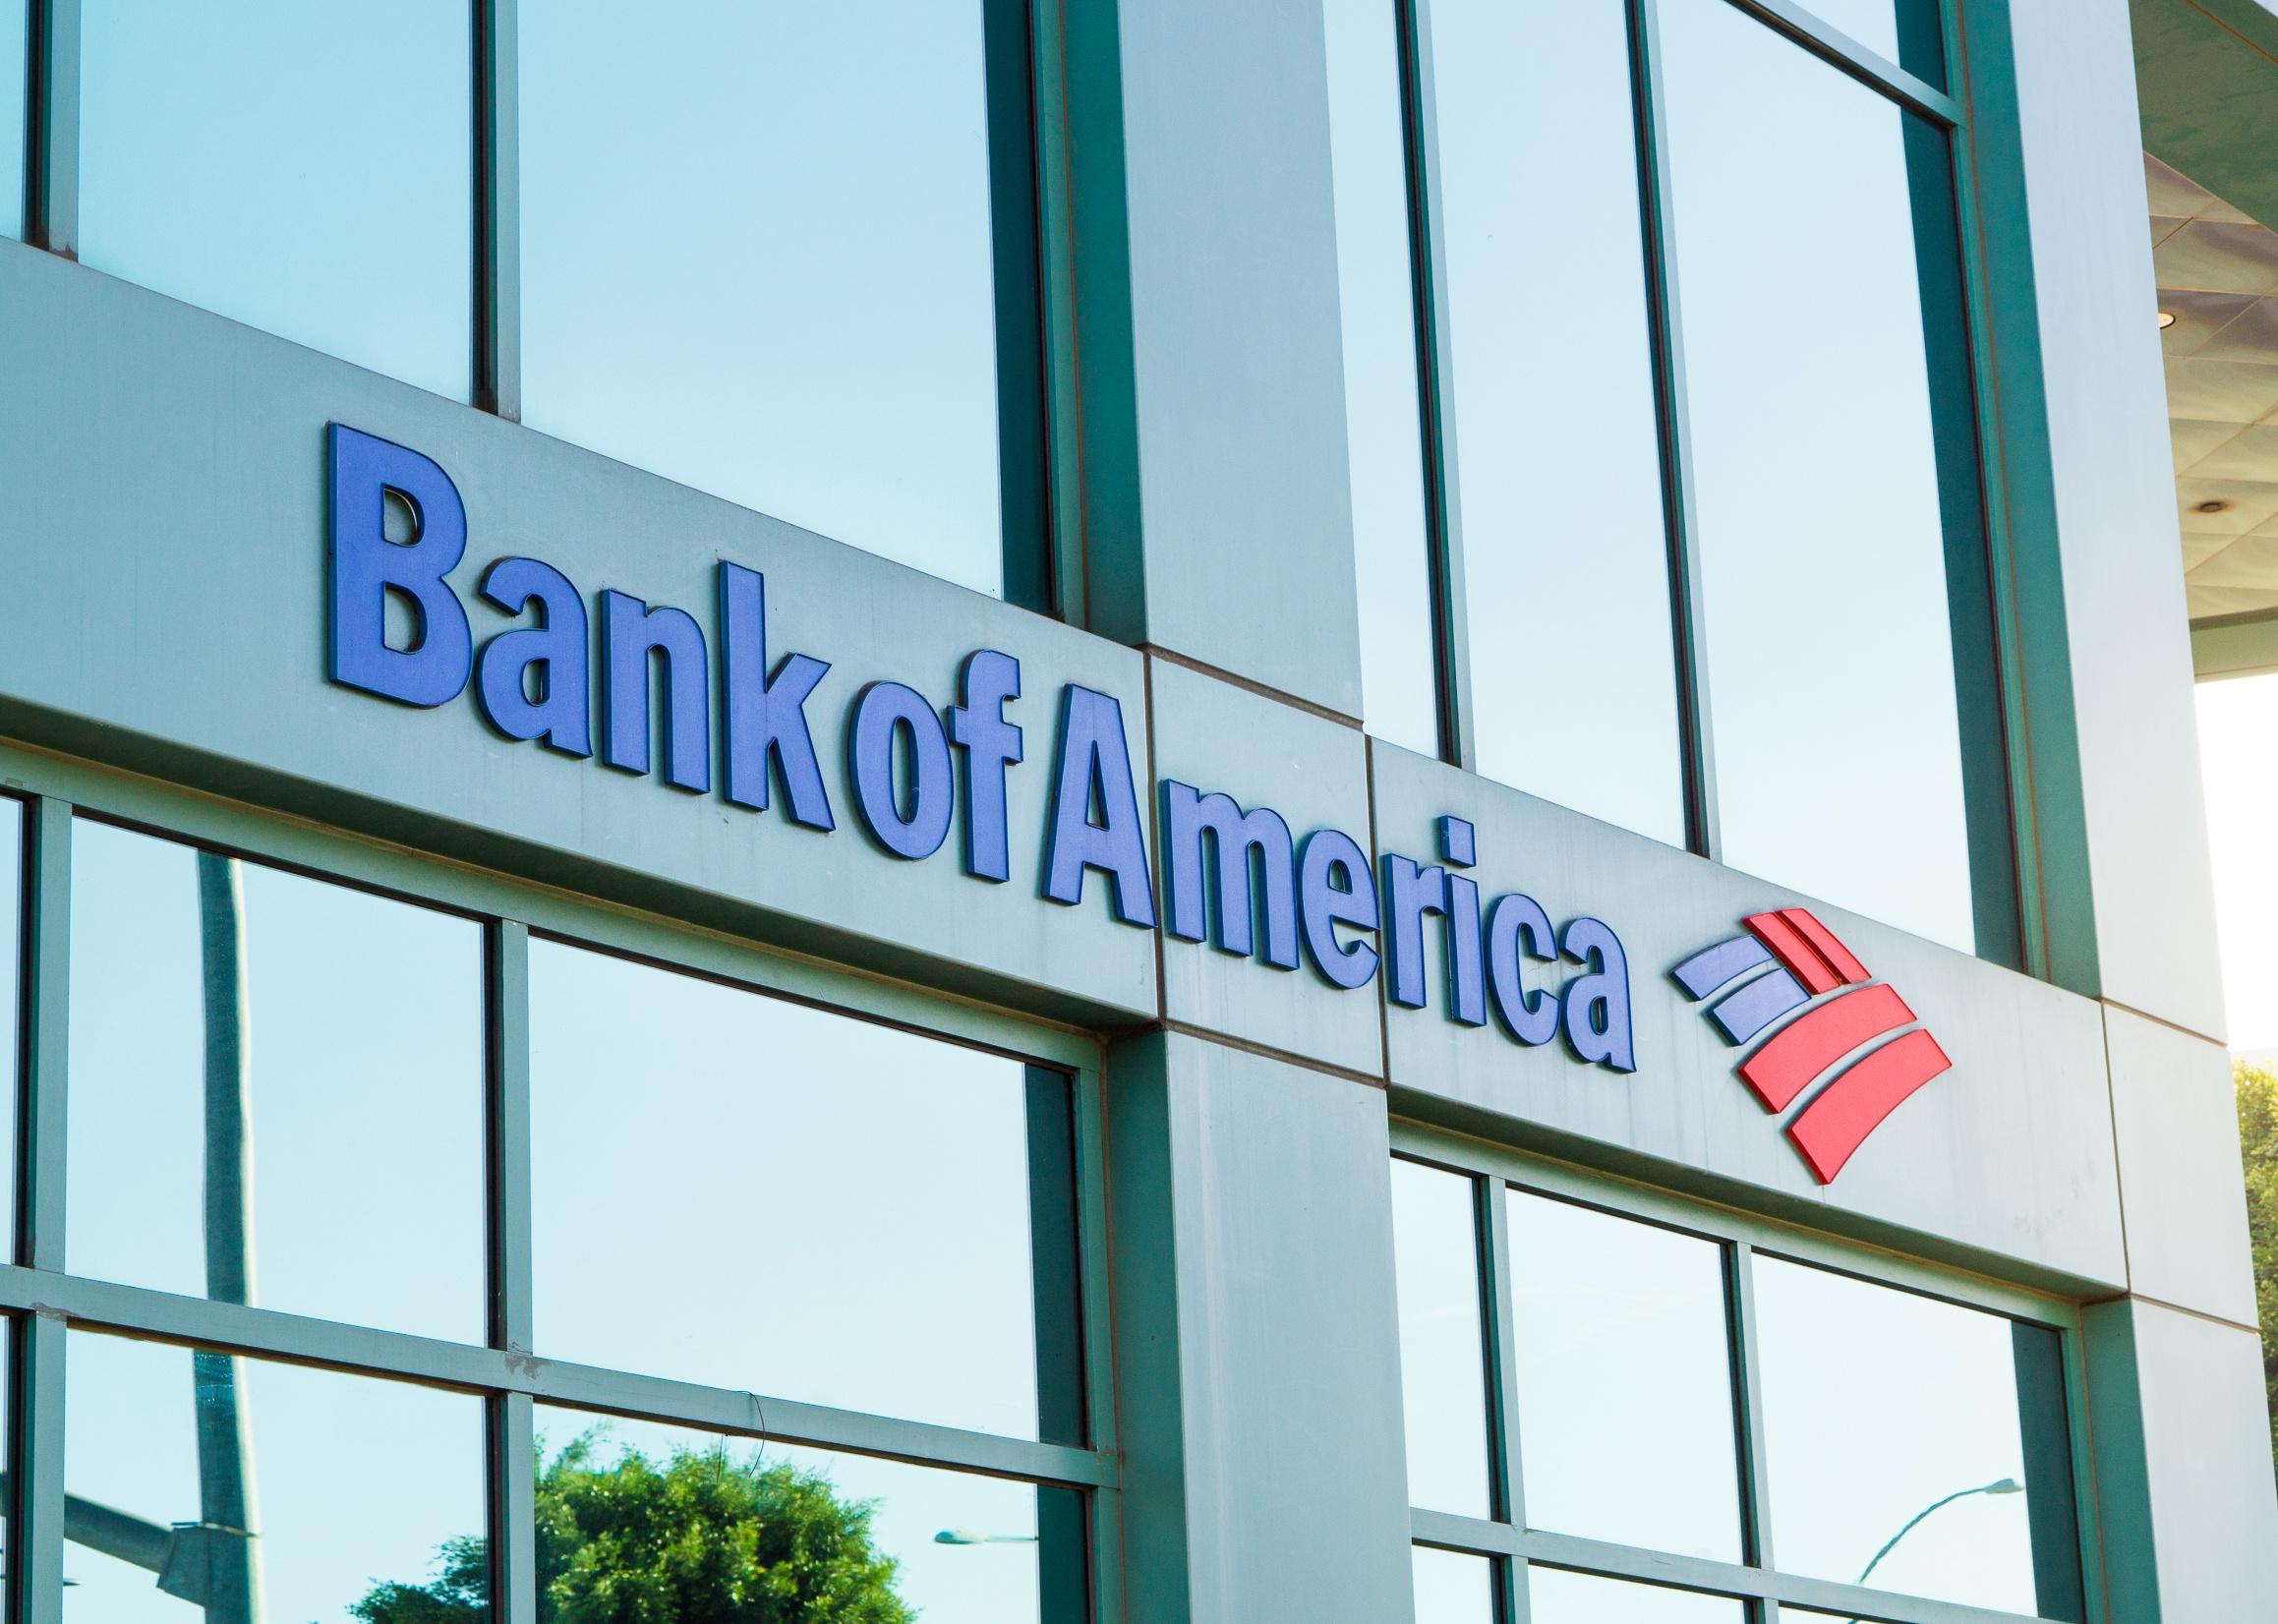 The logo of Bank of America in modern office building.